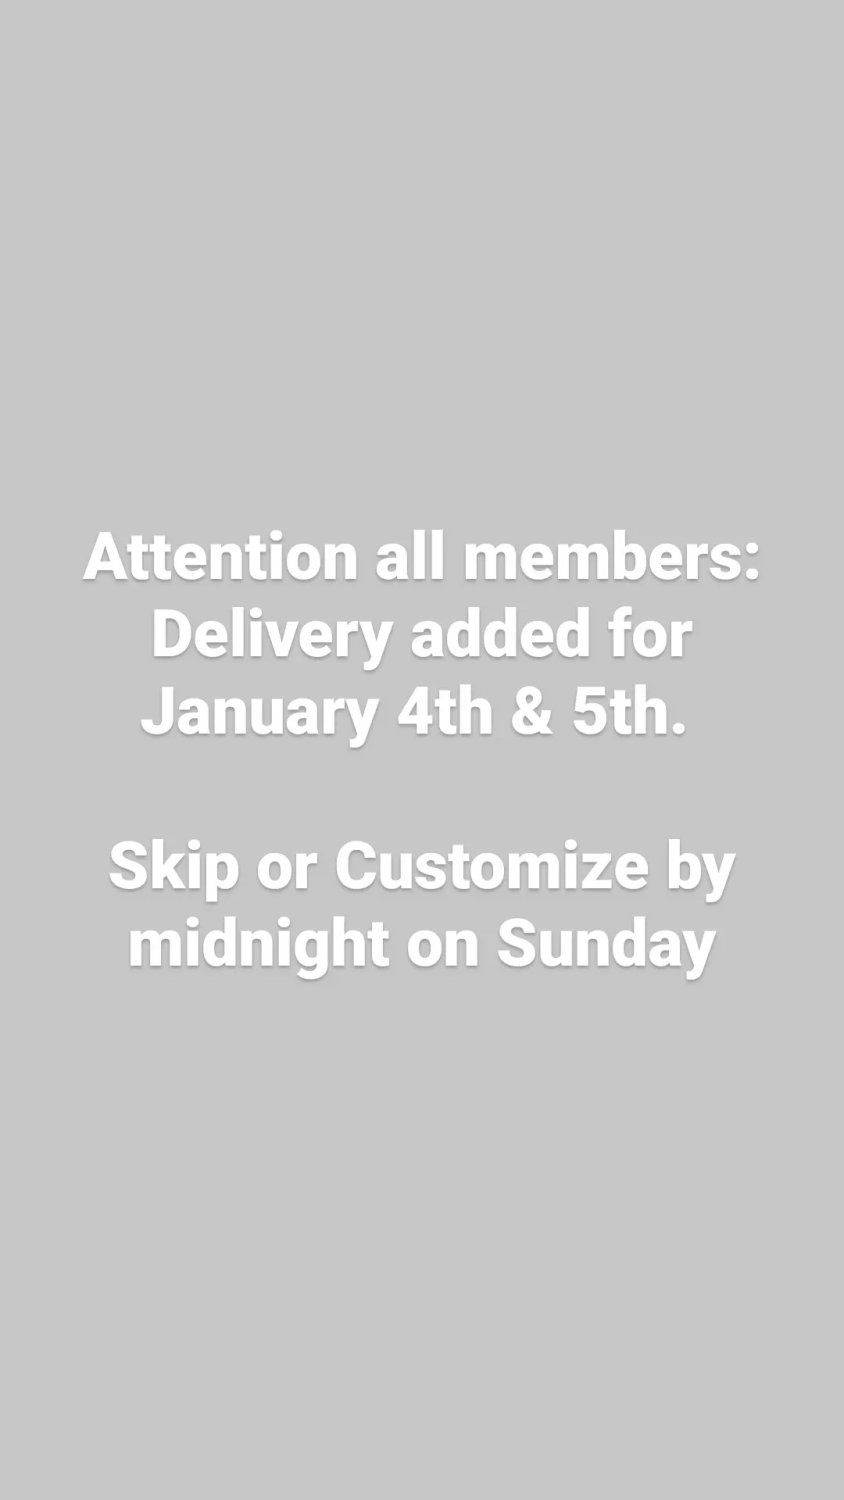 Next Happening: IMPORTANT: Delivery added for January 4th and 5th. Please customize your order.